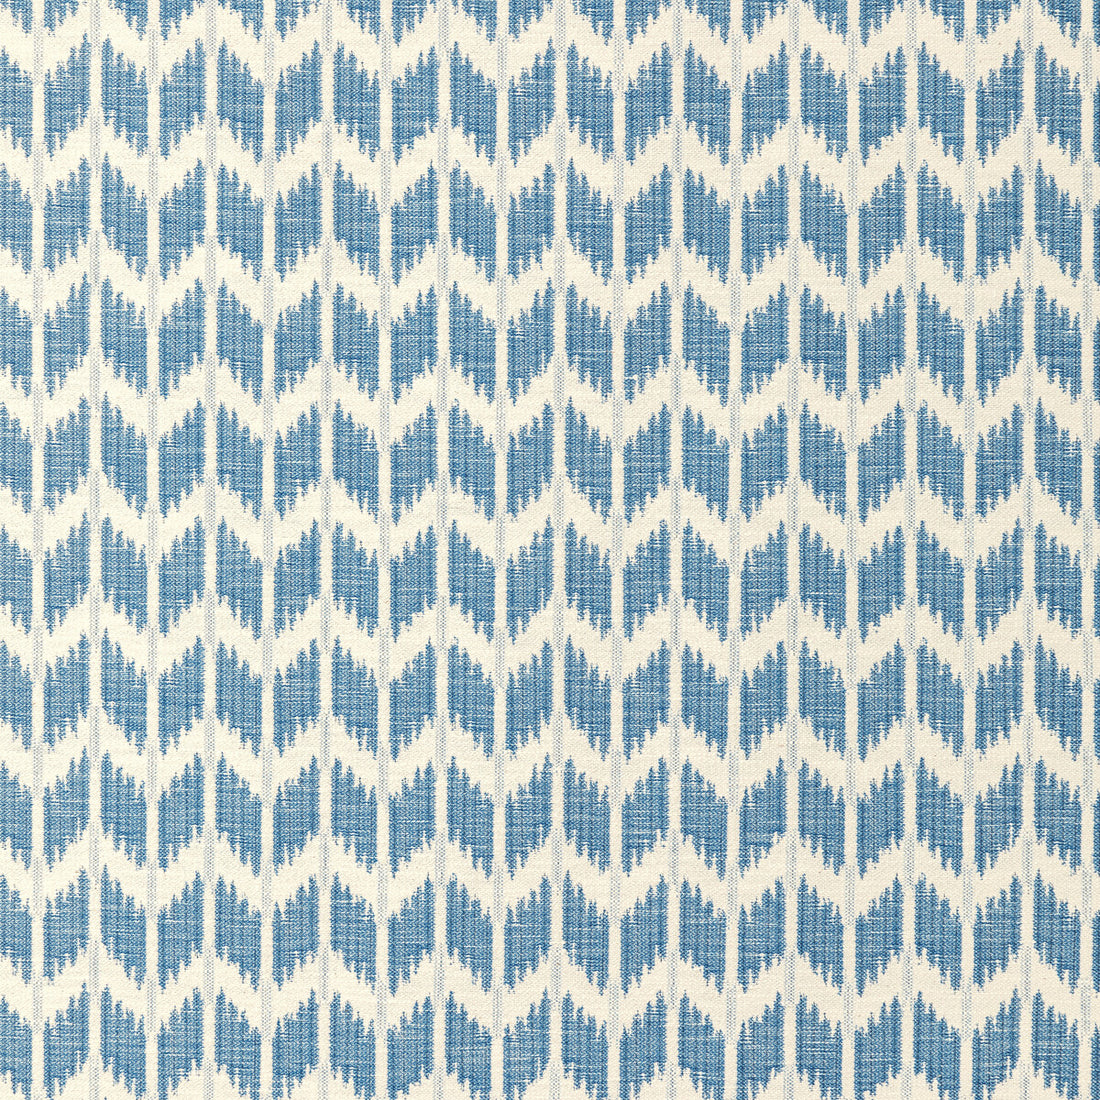 Lorient Weave fabric in delft color - pattern 8022111.15.0 - by Brunschwig &amp; Fils in the Lorient Weaves collection